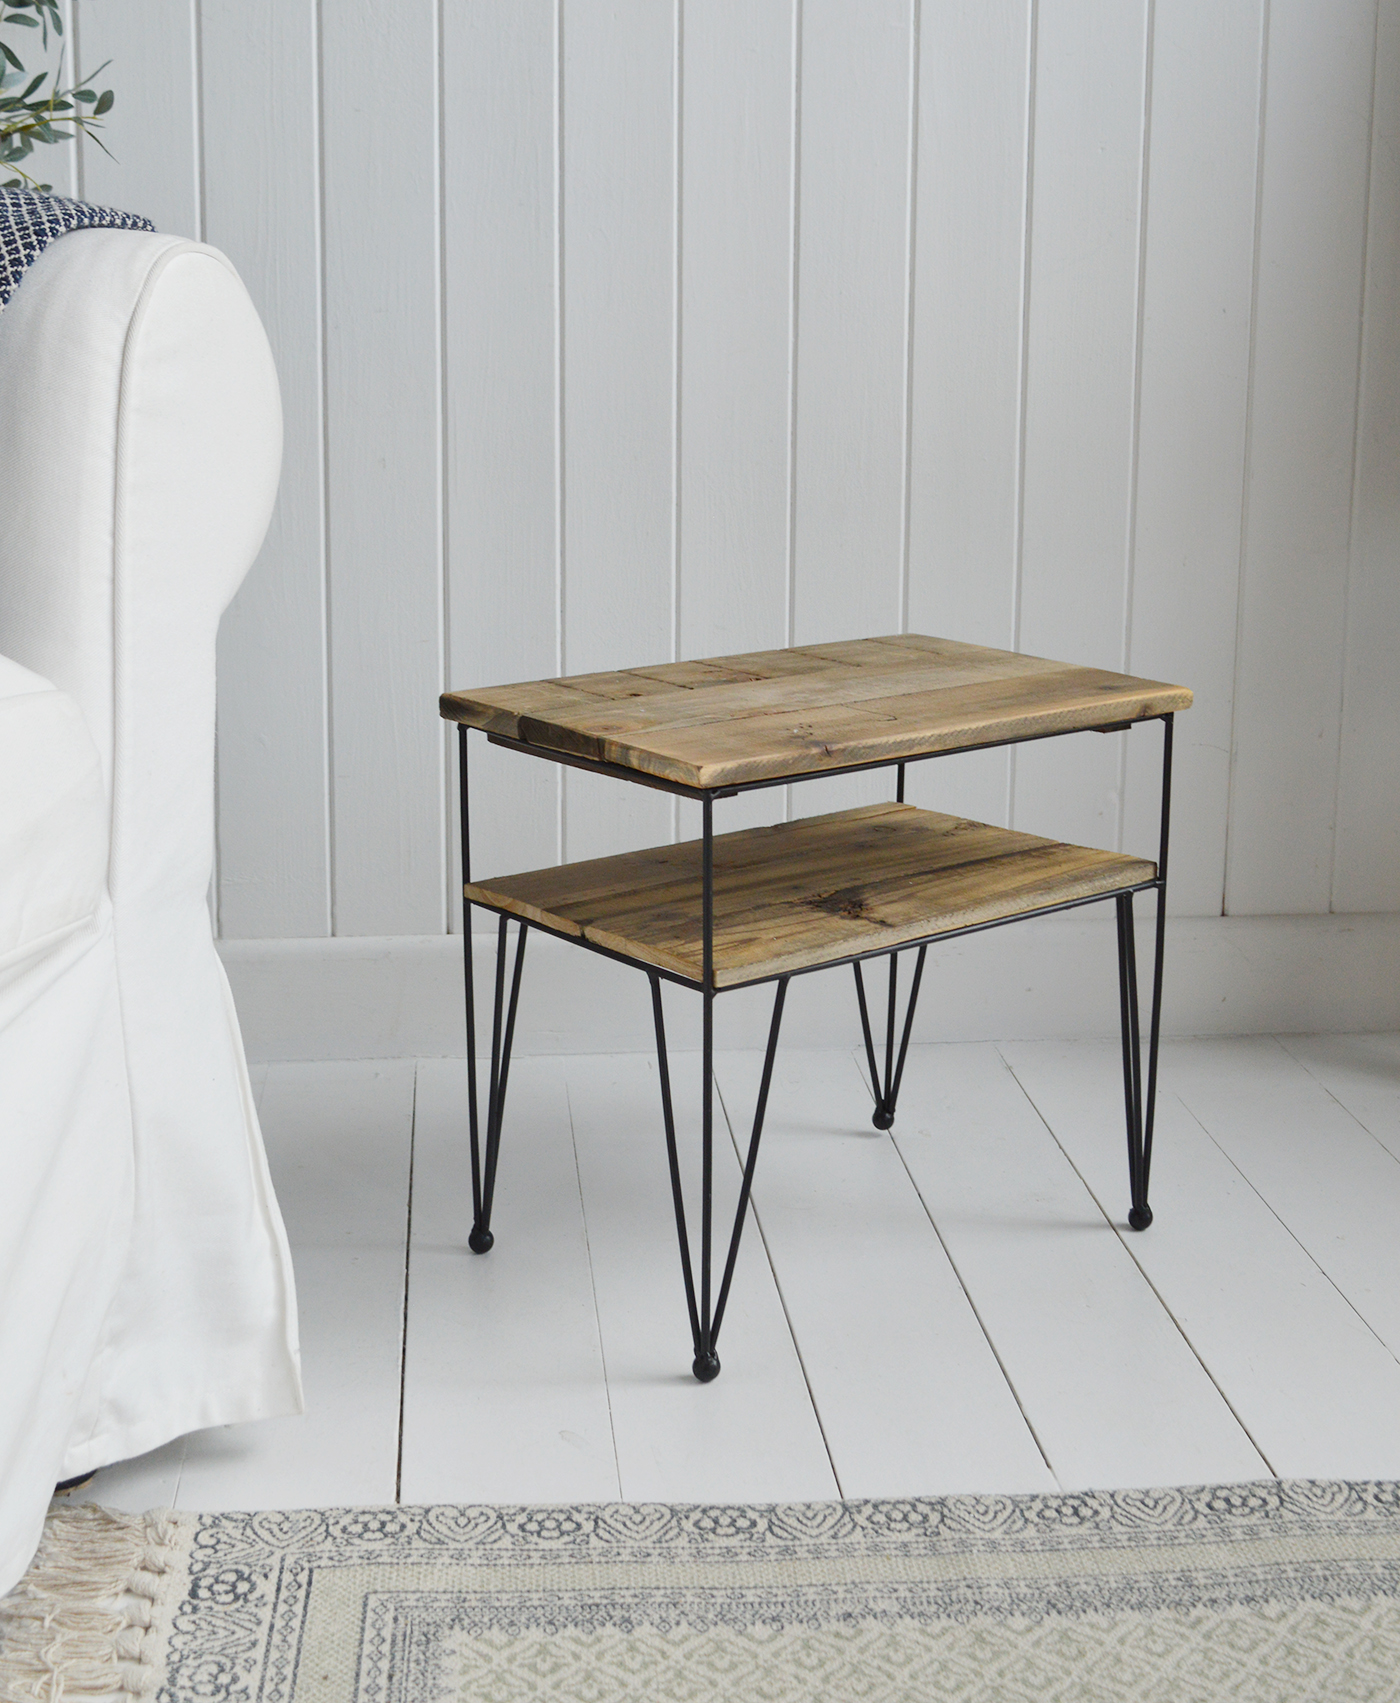 Peabody Tabble - New England Coastal, Modern Farmhouse and Country Furniture and Interiors